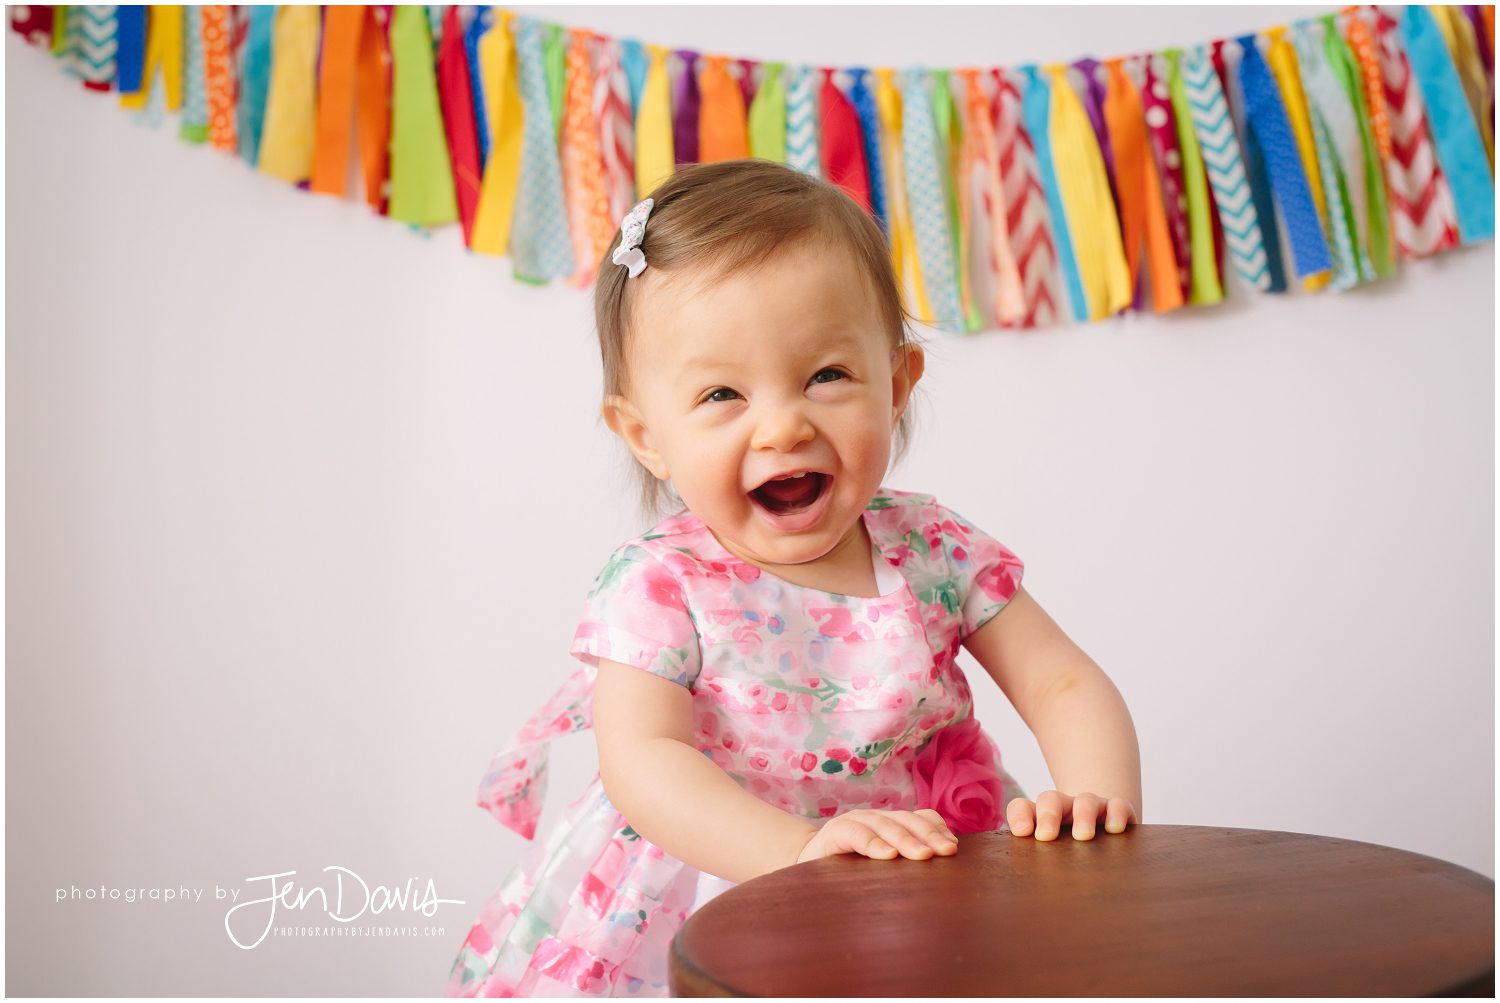 1 year old girl laughing on stool